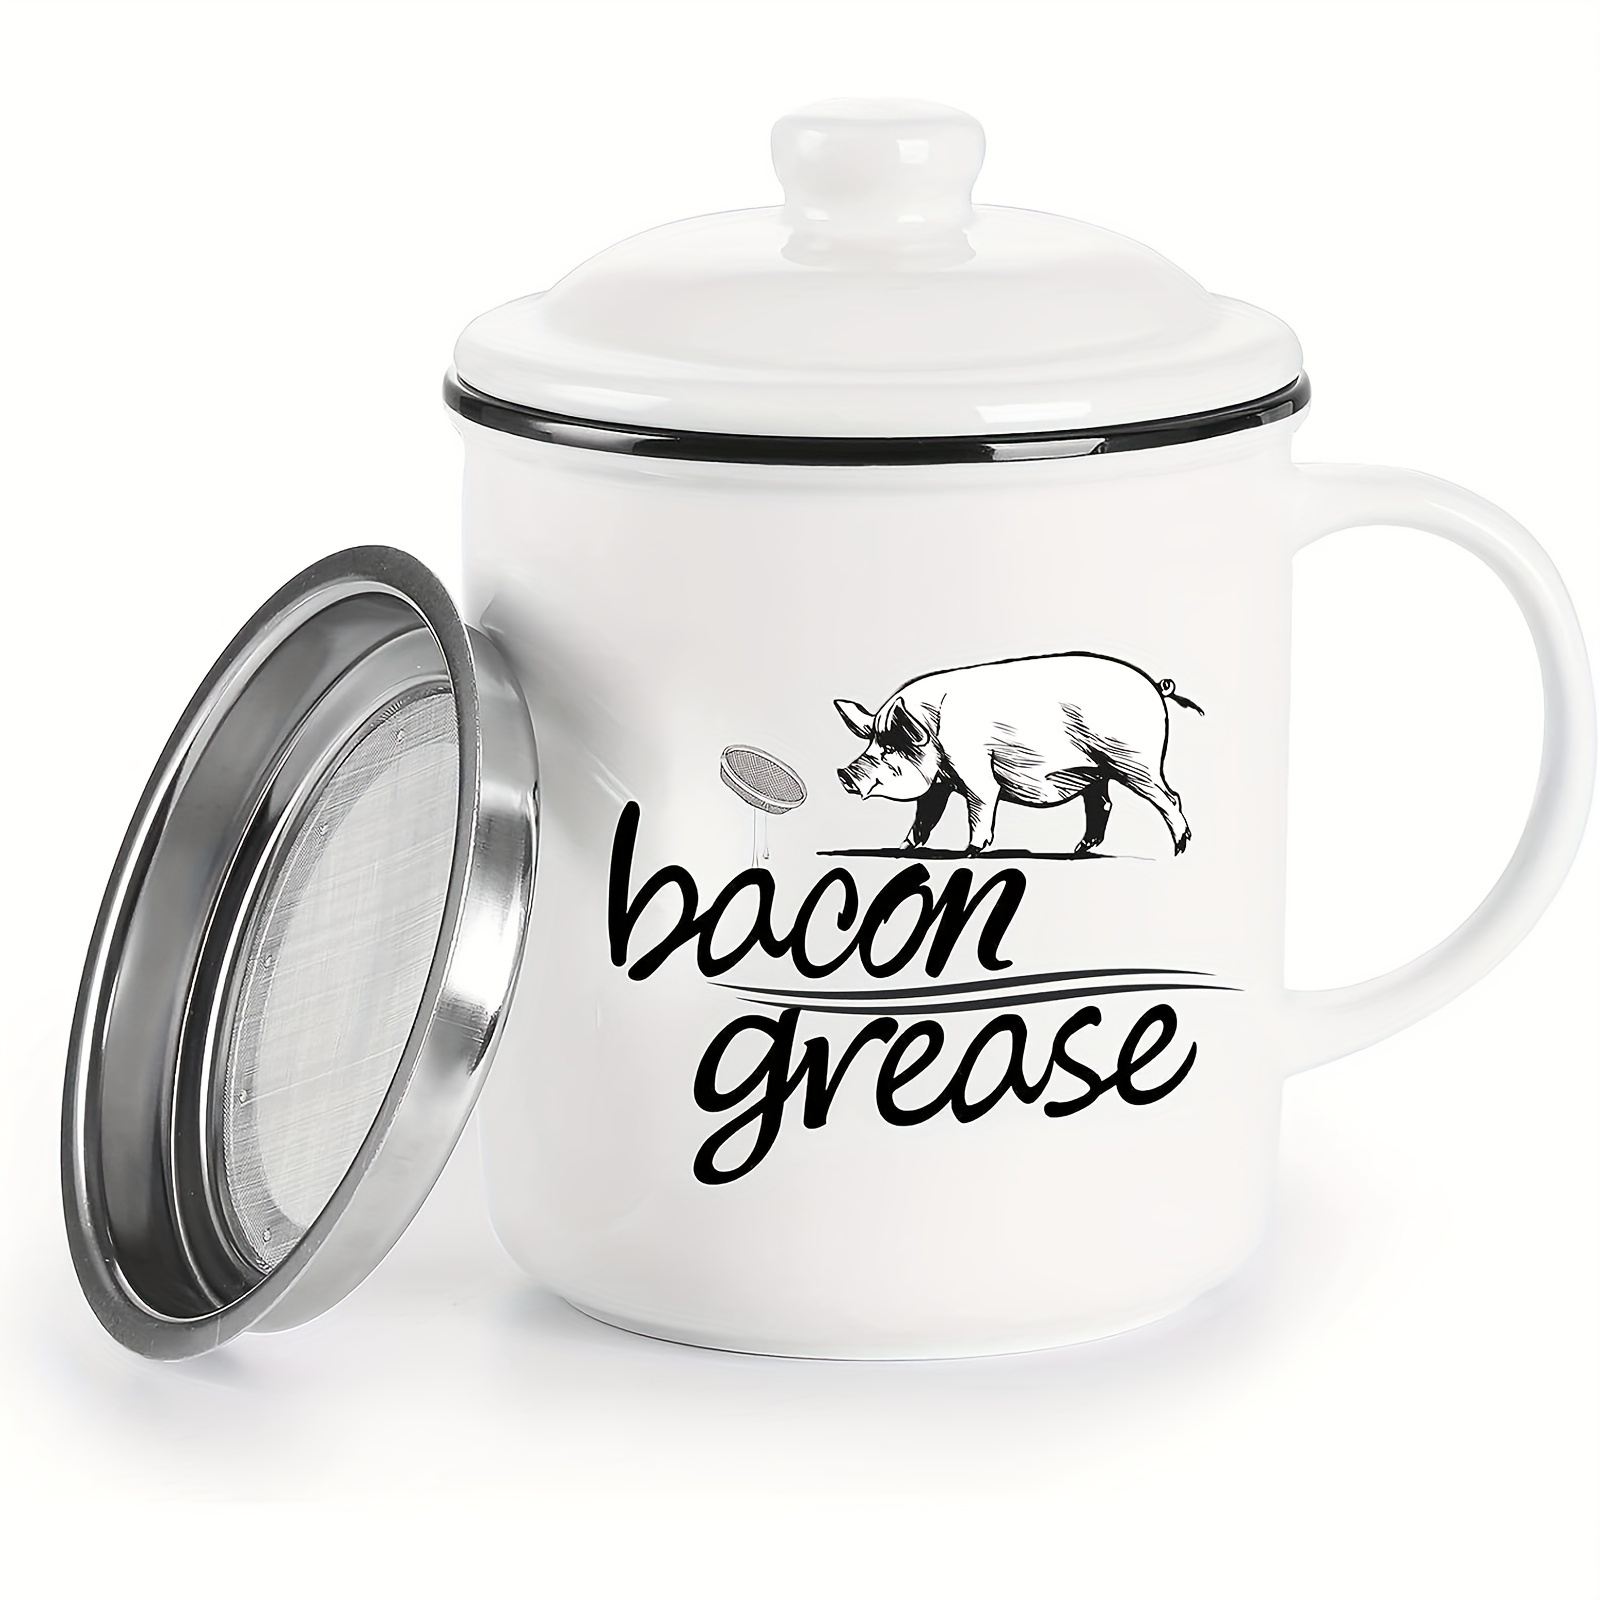 1pc Bacon Grease Keeper Grease Strainer Pot Grease Container with